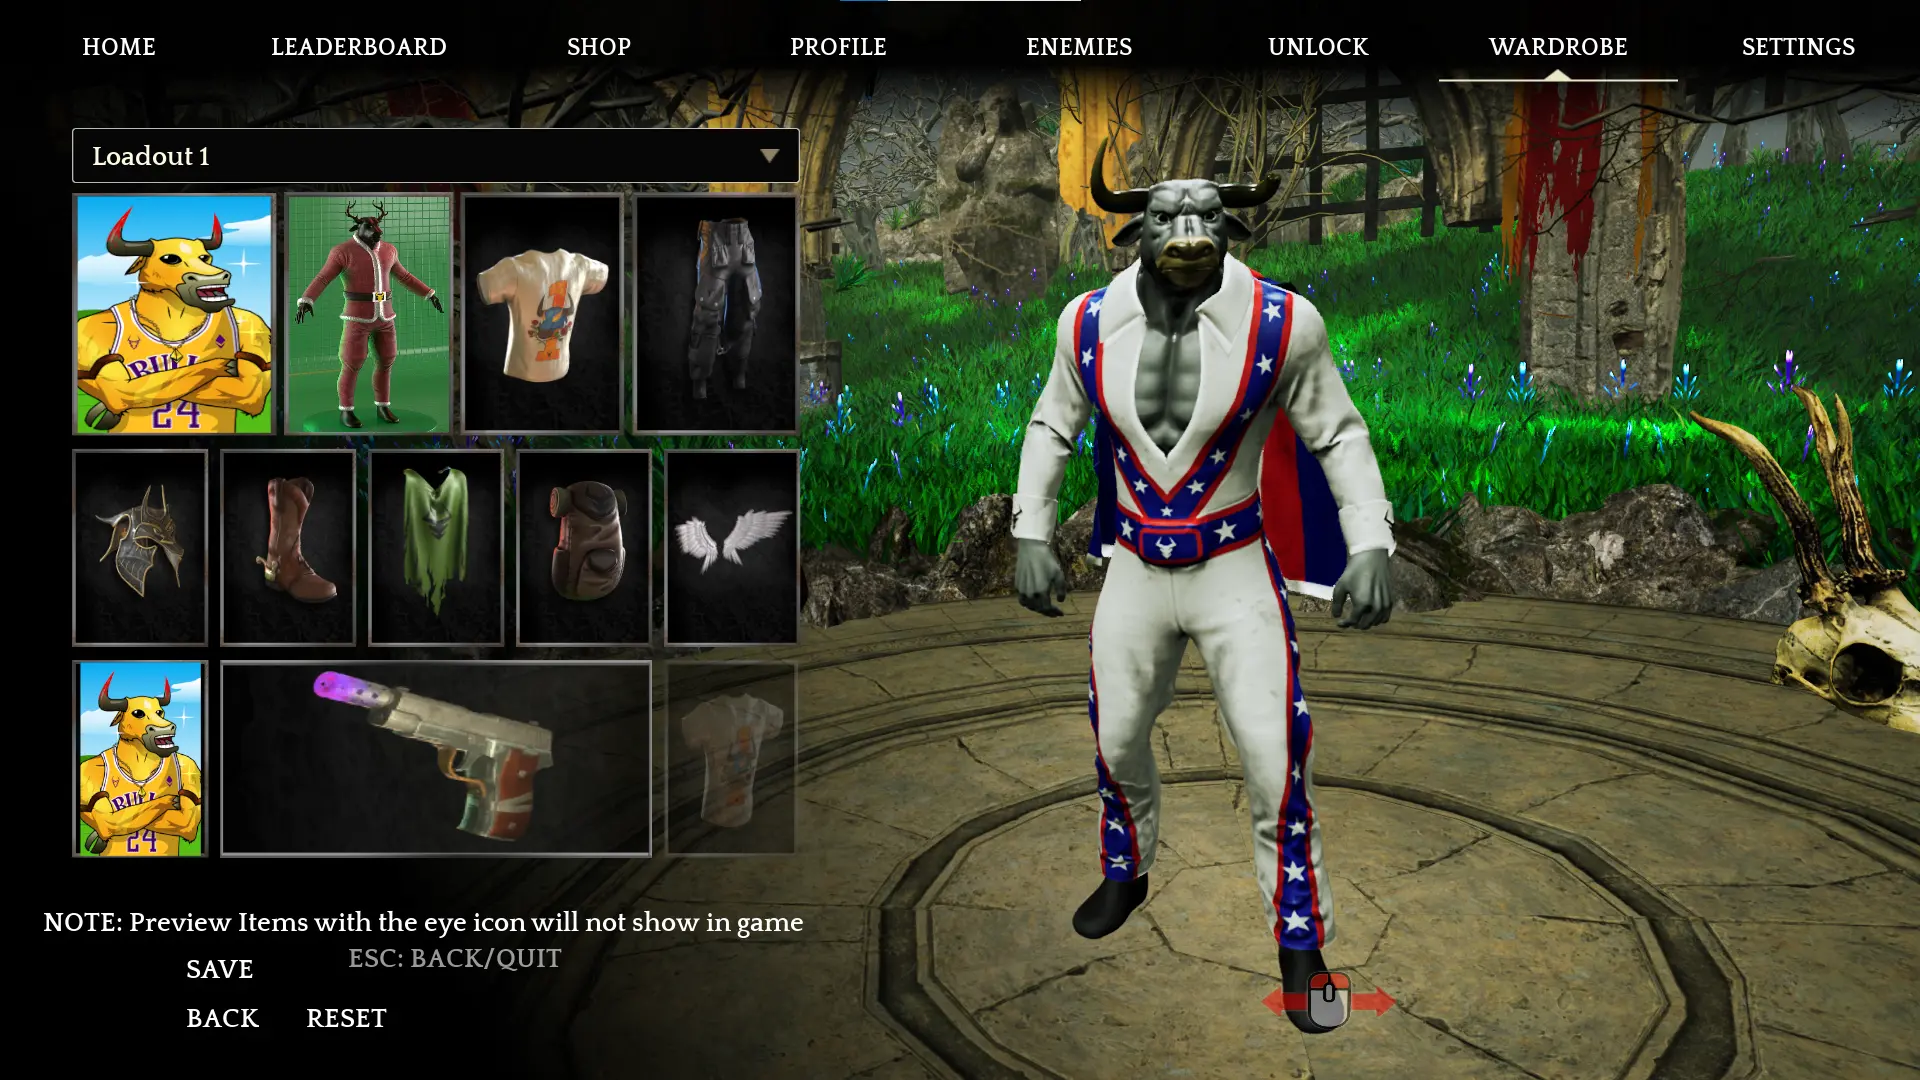 The lobby of Necrodemic features a wardrobe section where players can choose from a vast variety of characters with different clothing designs.